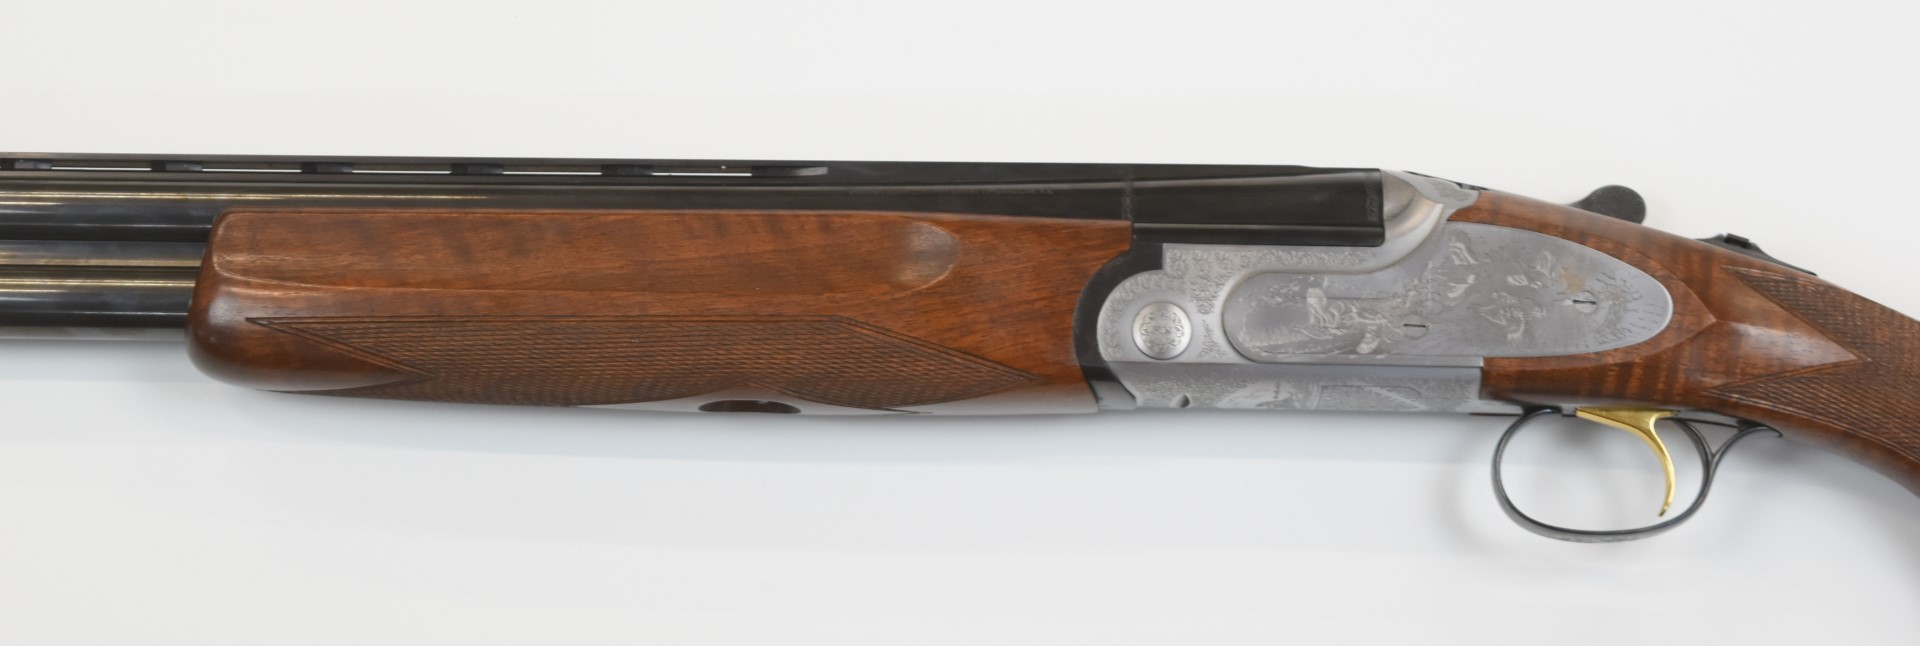 Sabatti 12 bore over under ejector shotgun with engraved scenes of birds to the sidelock plates - Image 9 of 12